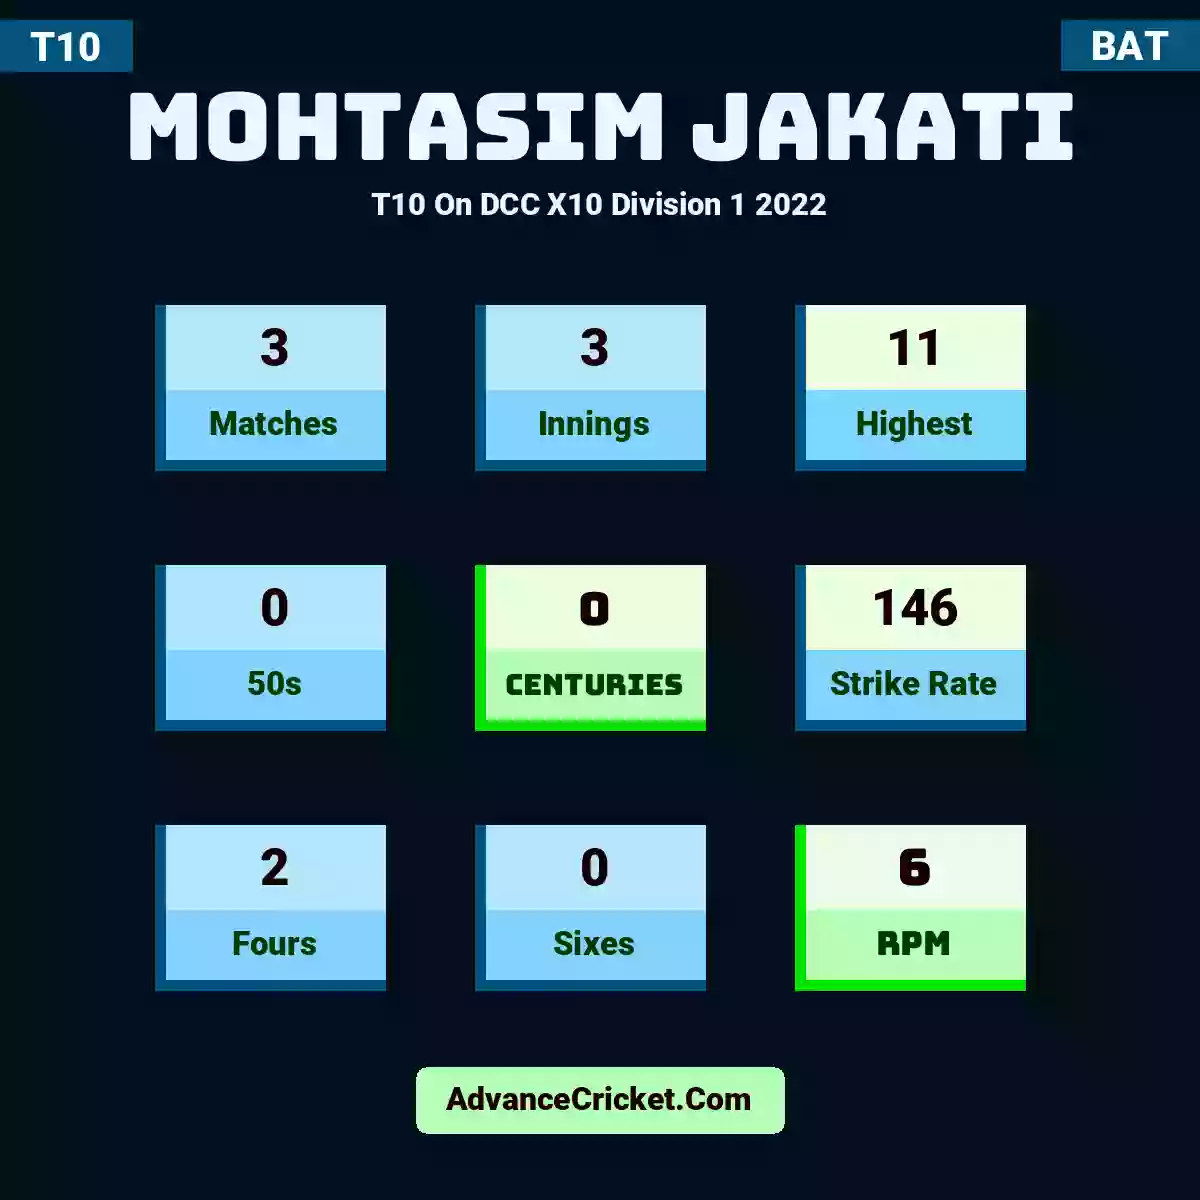 Mohtasim Jakati T10  On DCC X10 Division 1 2022, Mohtasim Jakati played 3 matches, scored 11 runs as highest, 0 half-centuries, and 0 centuries, with a strike rate of 146. M.Jakati hit 2 fours and 0 sixes, with an RPM of 6.